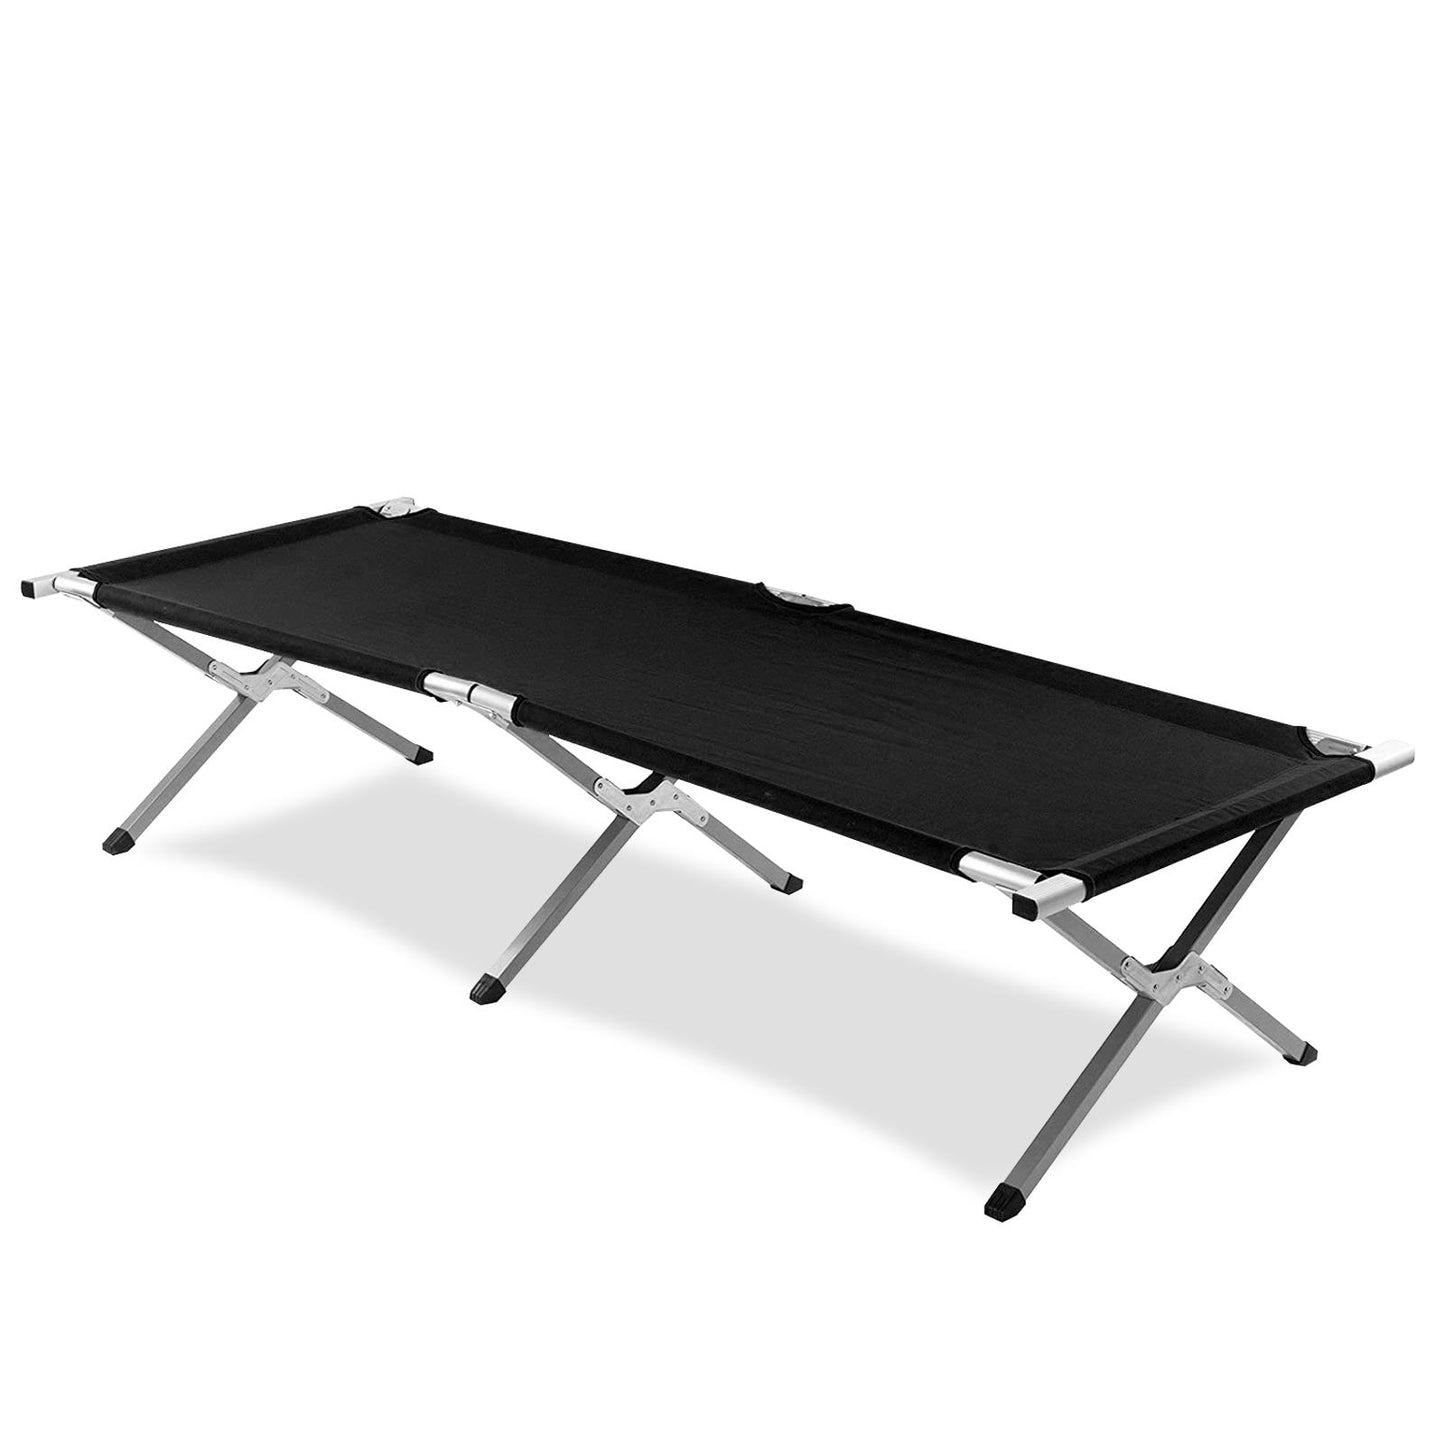 Lightweight Folding Bed For Camping Or Fishing Trips